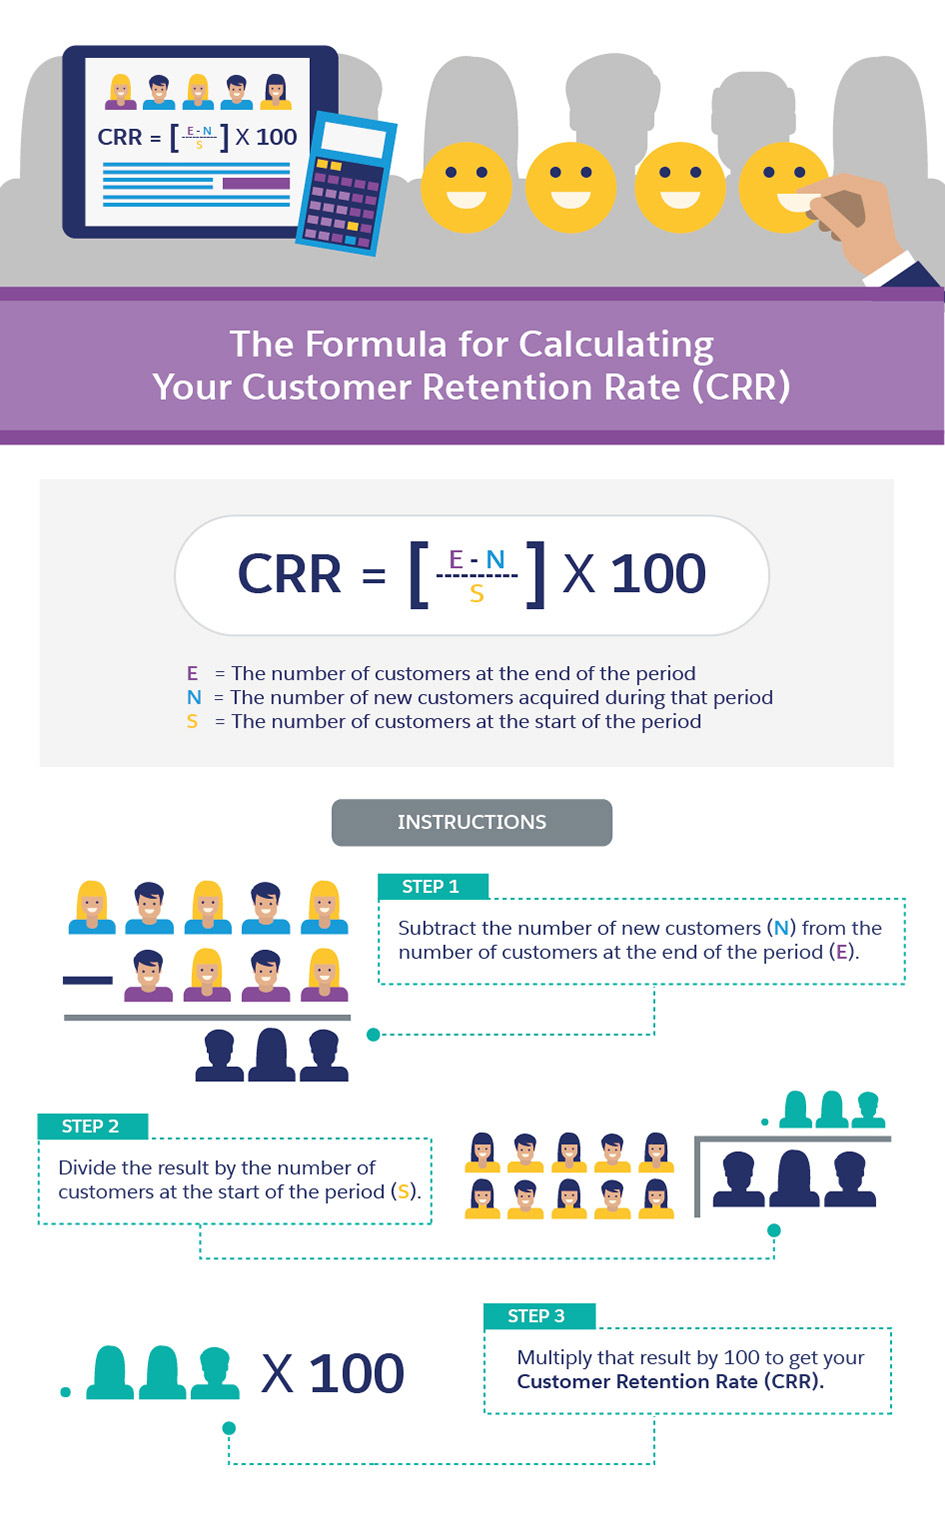 The Formula for Calculating your Retention Rate